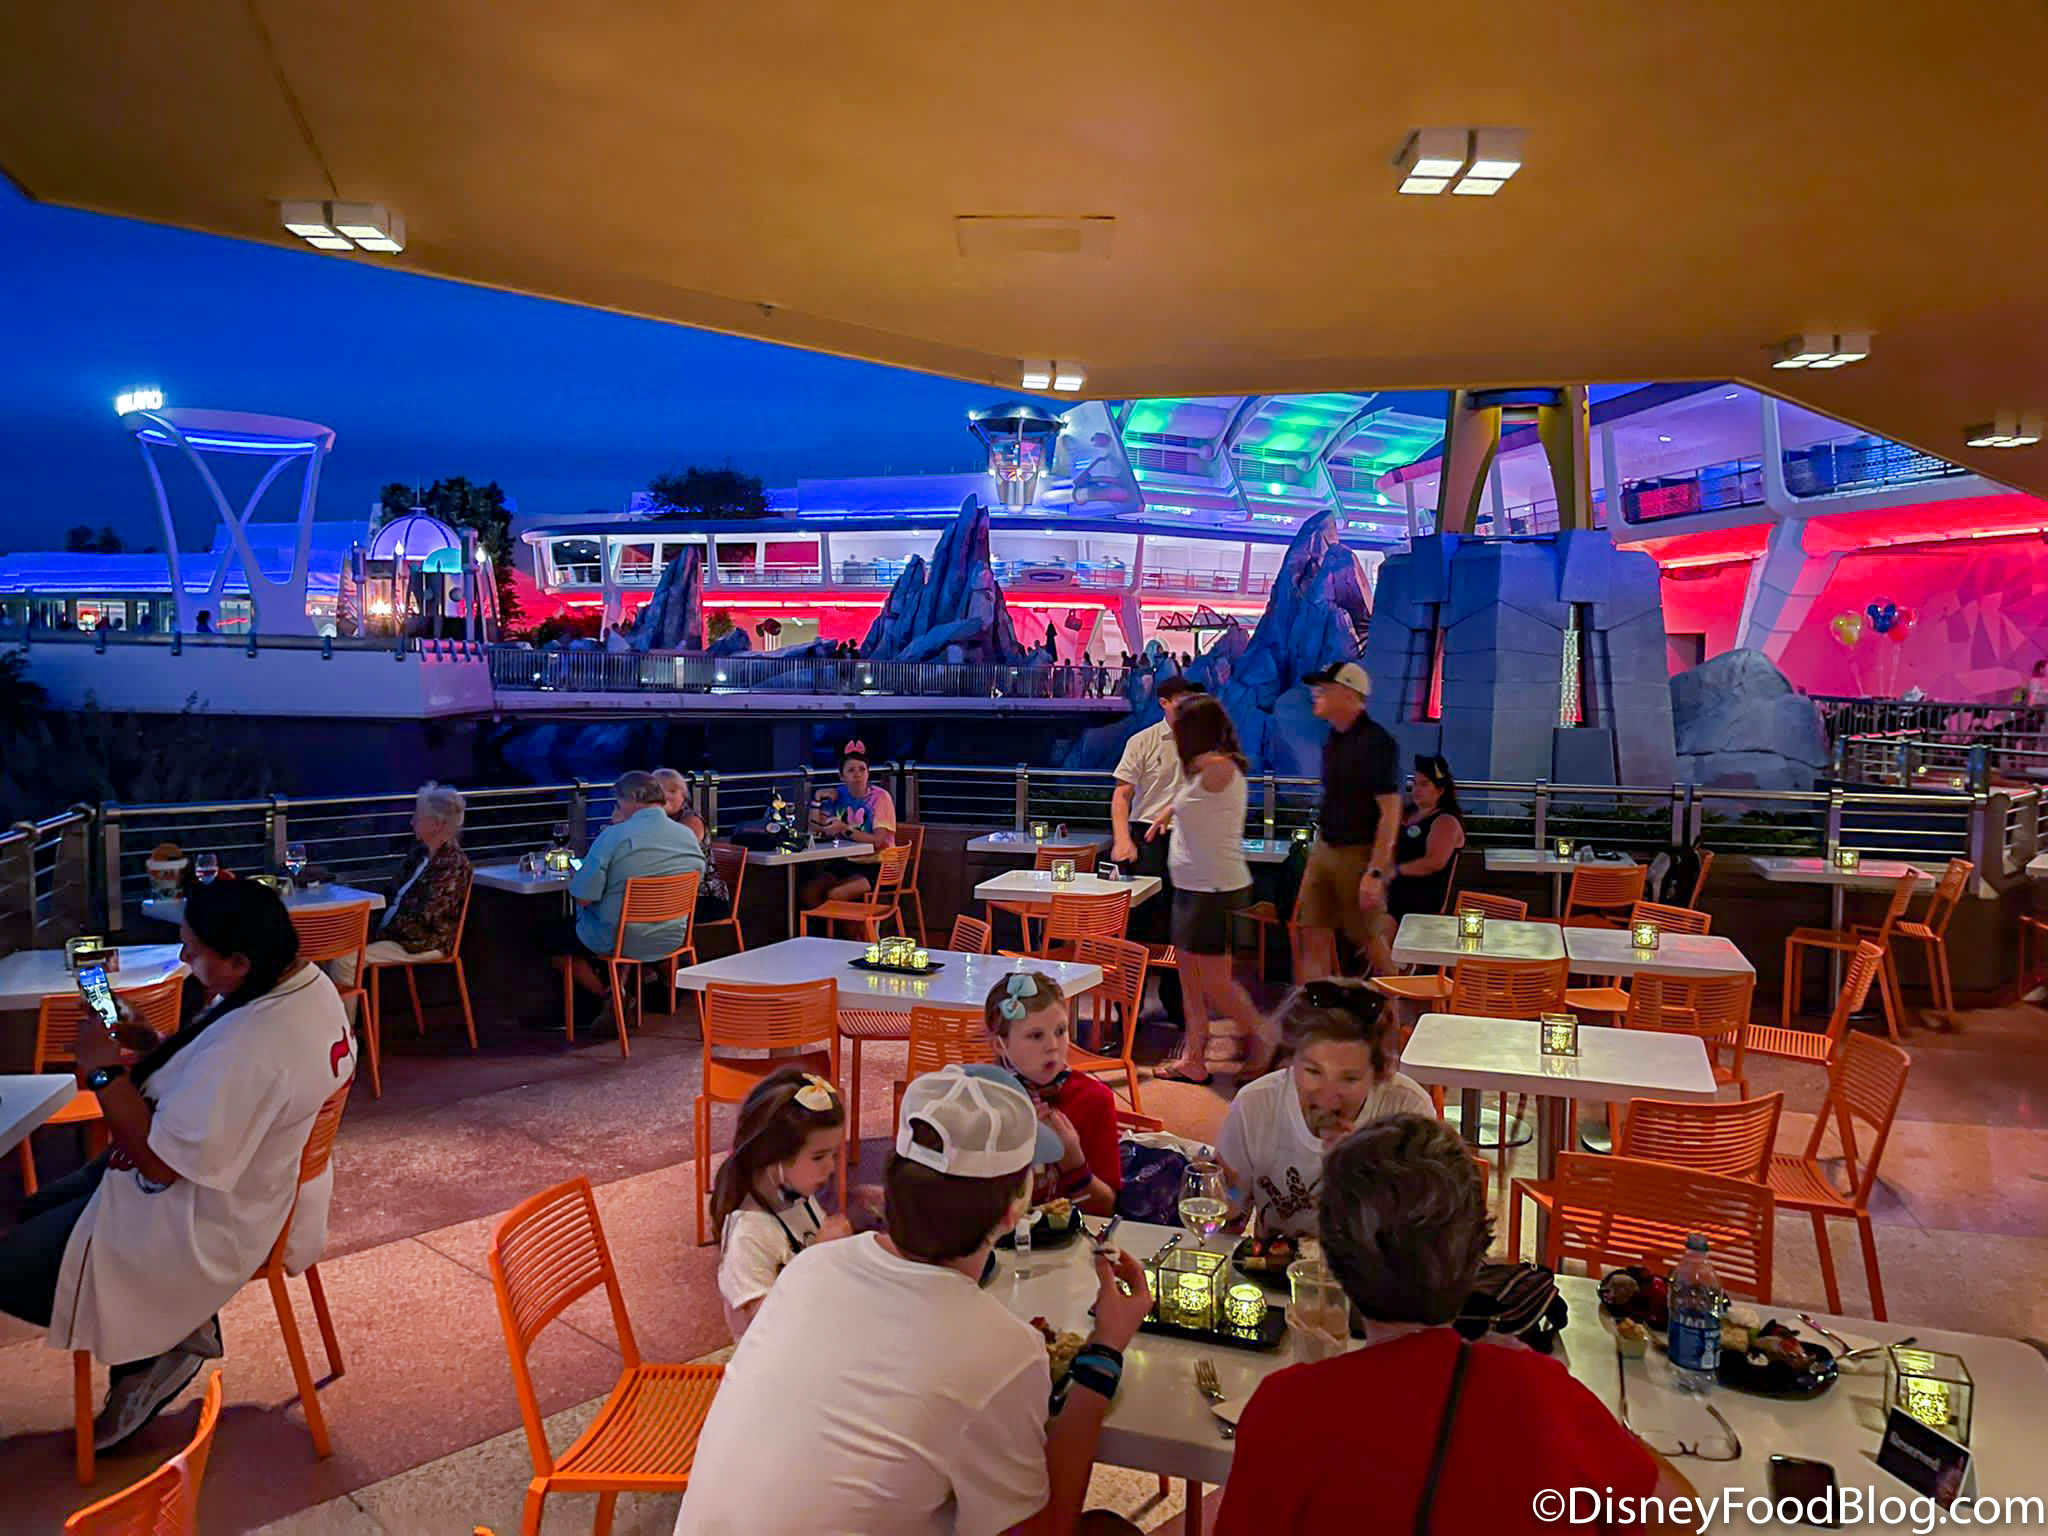 Review: Even Without Fireworks, This EPCOT Restaurant Is Worth